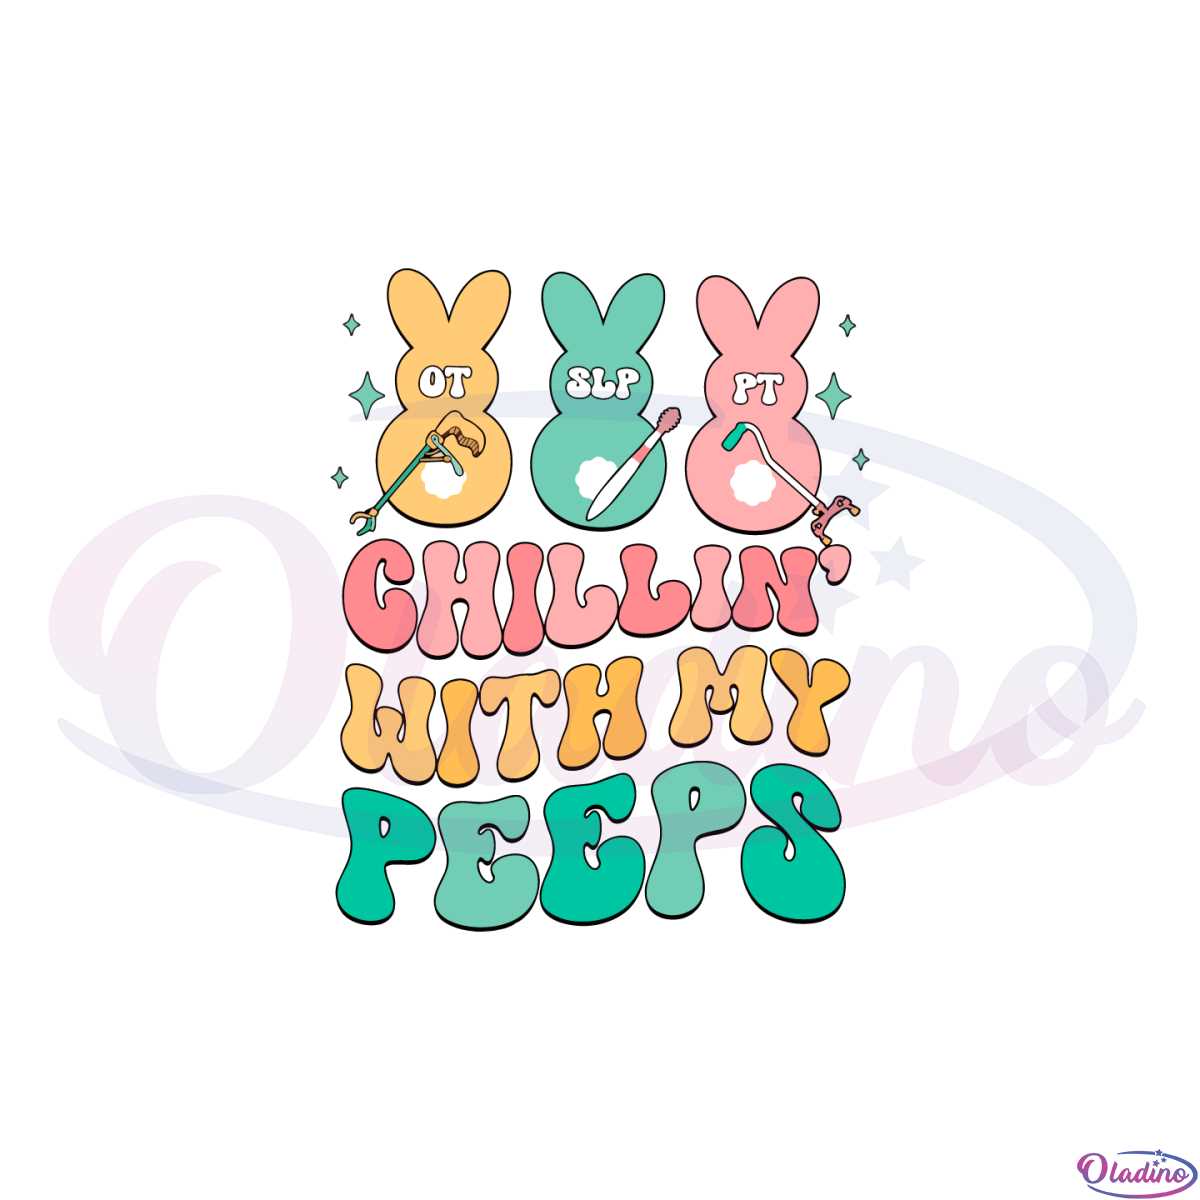 chillin-with-my-peeps-slp-ot-pt-easter-peeps-svg-cutting-files